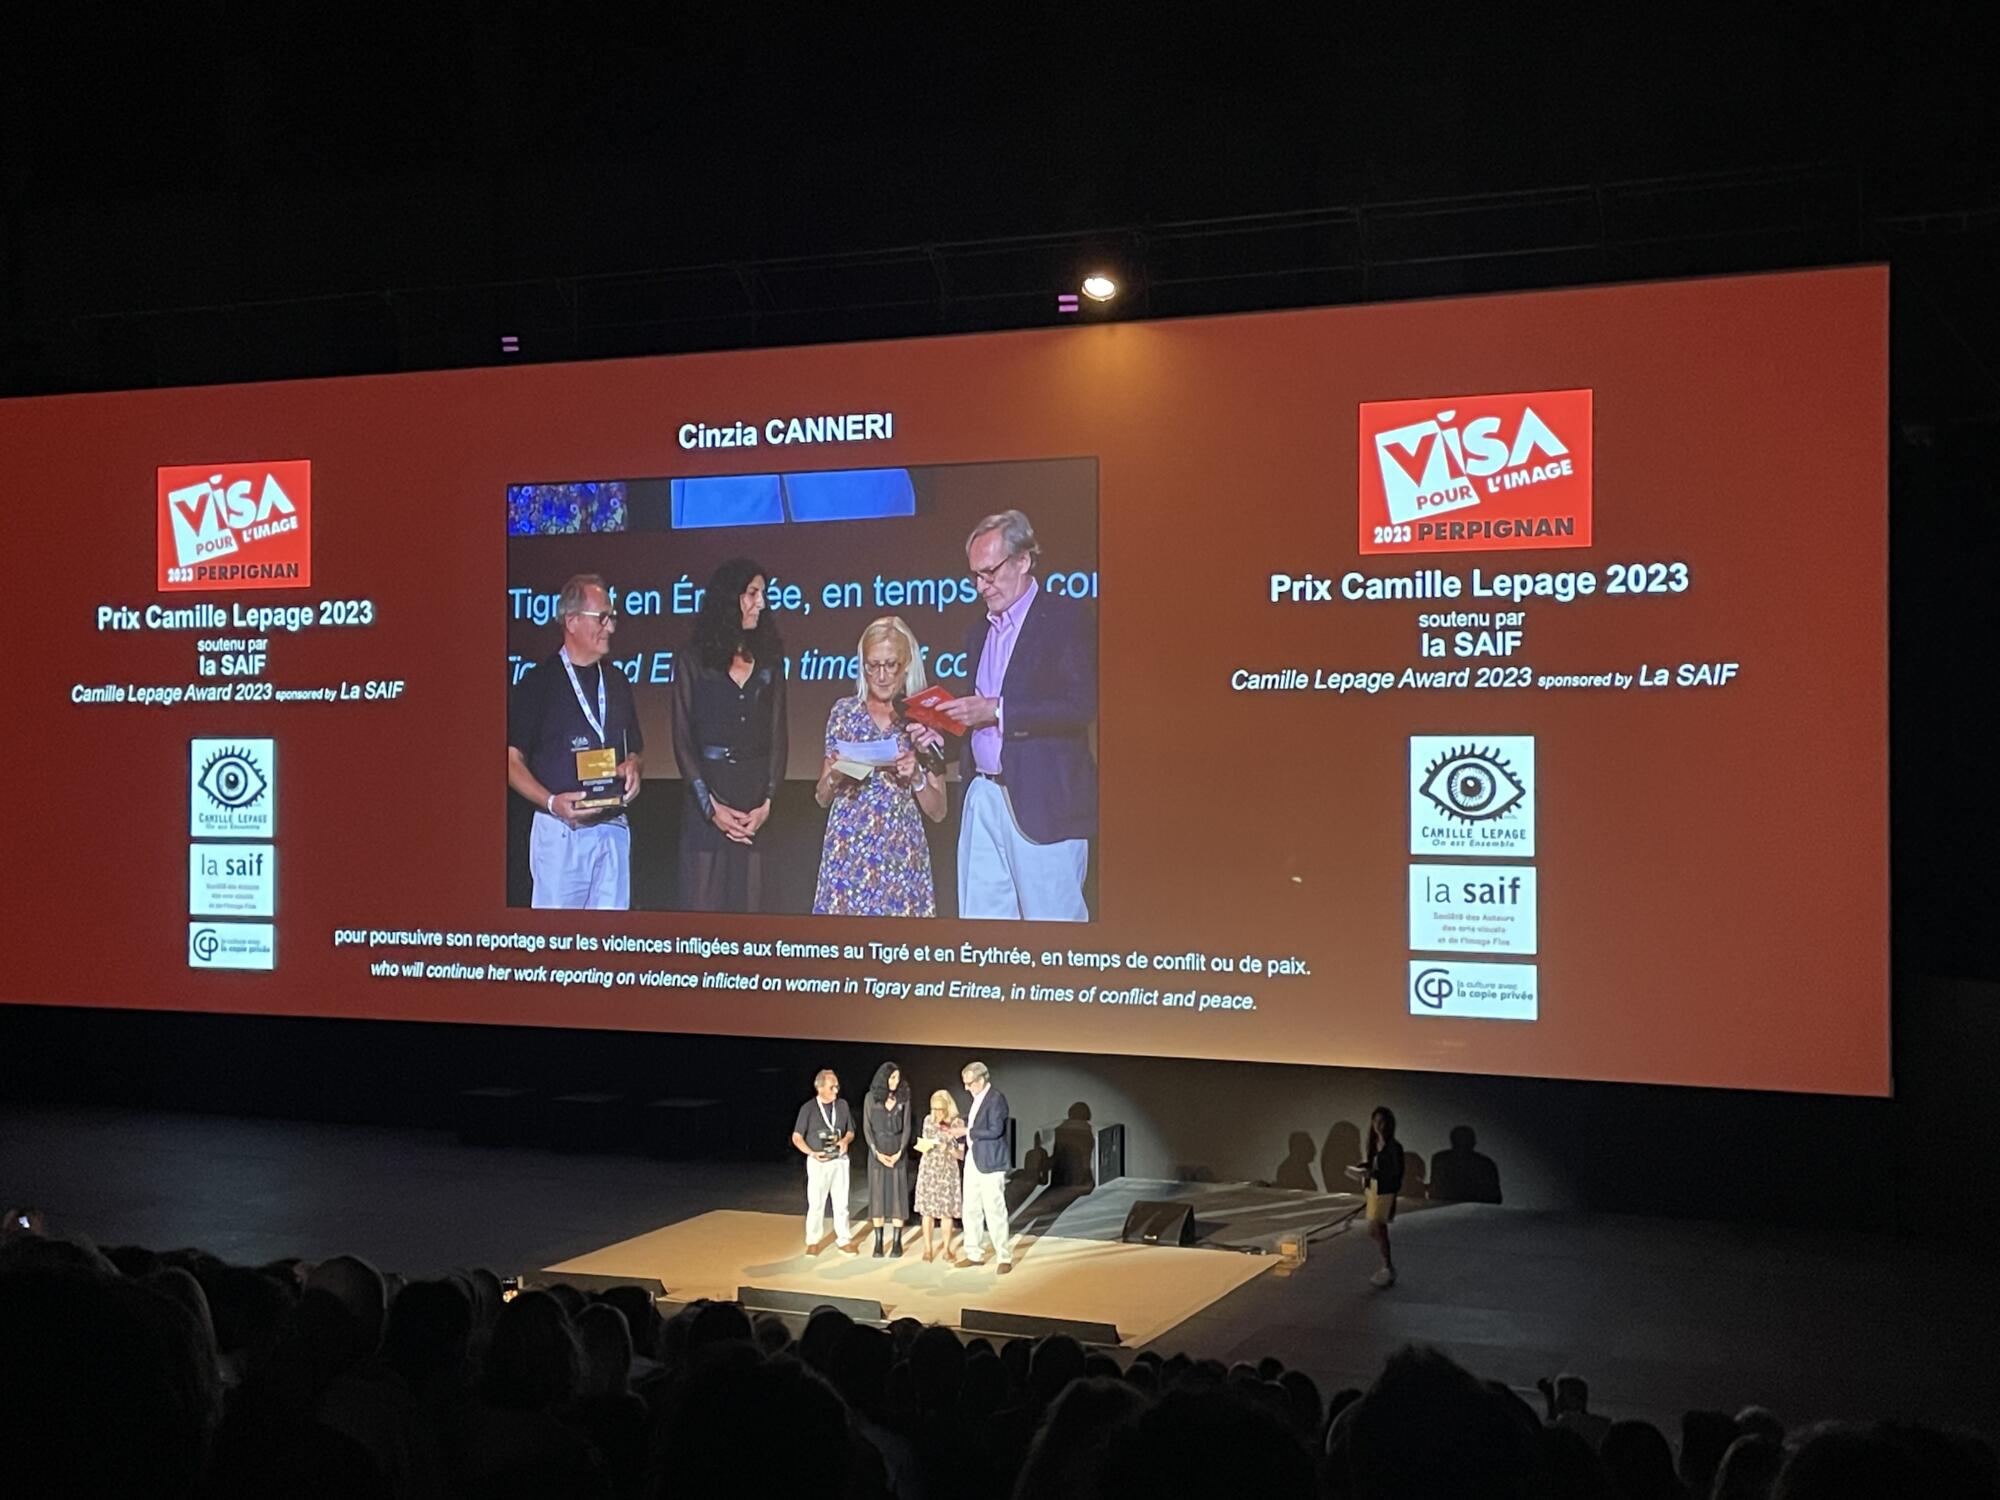 Visa pour l’image 2023 : Cinzia Canneri, winner of the 2023 Camille Lepage award